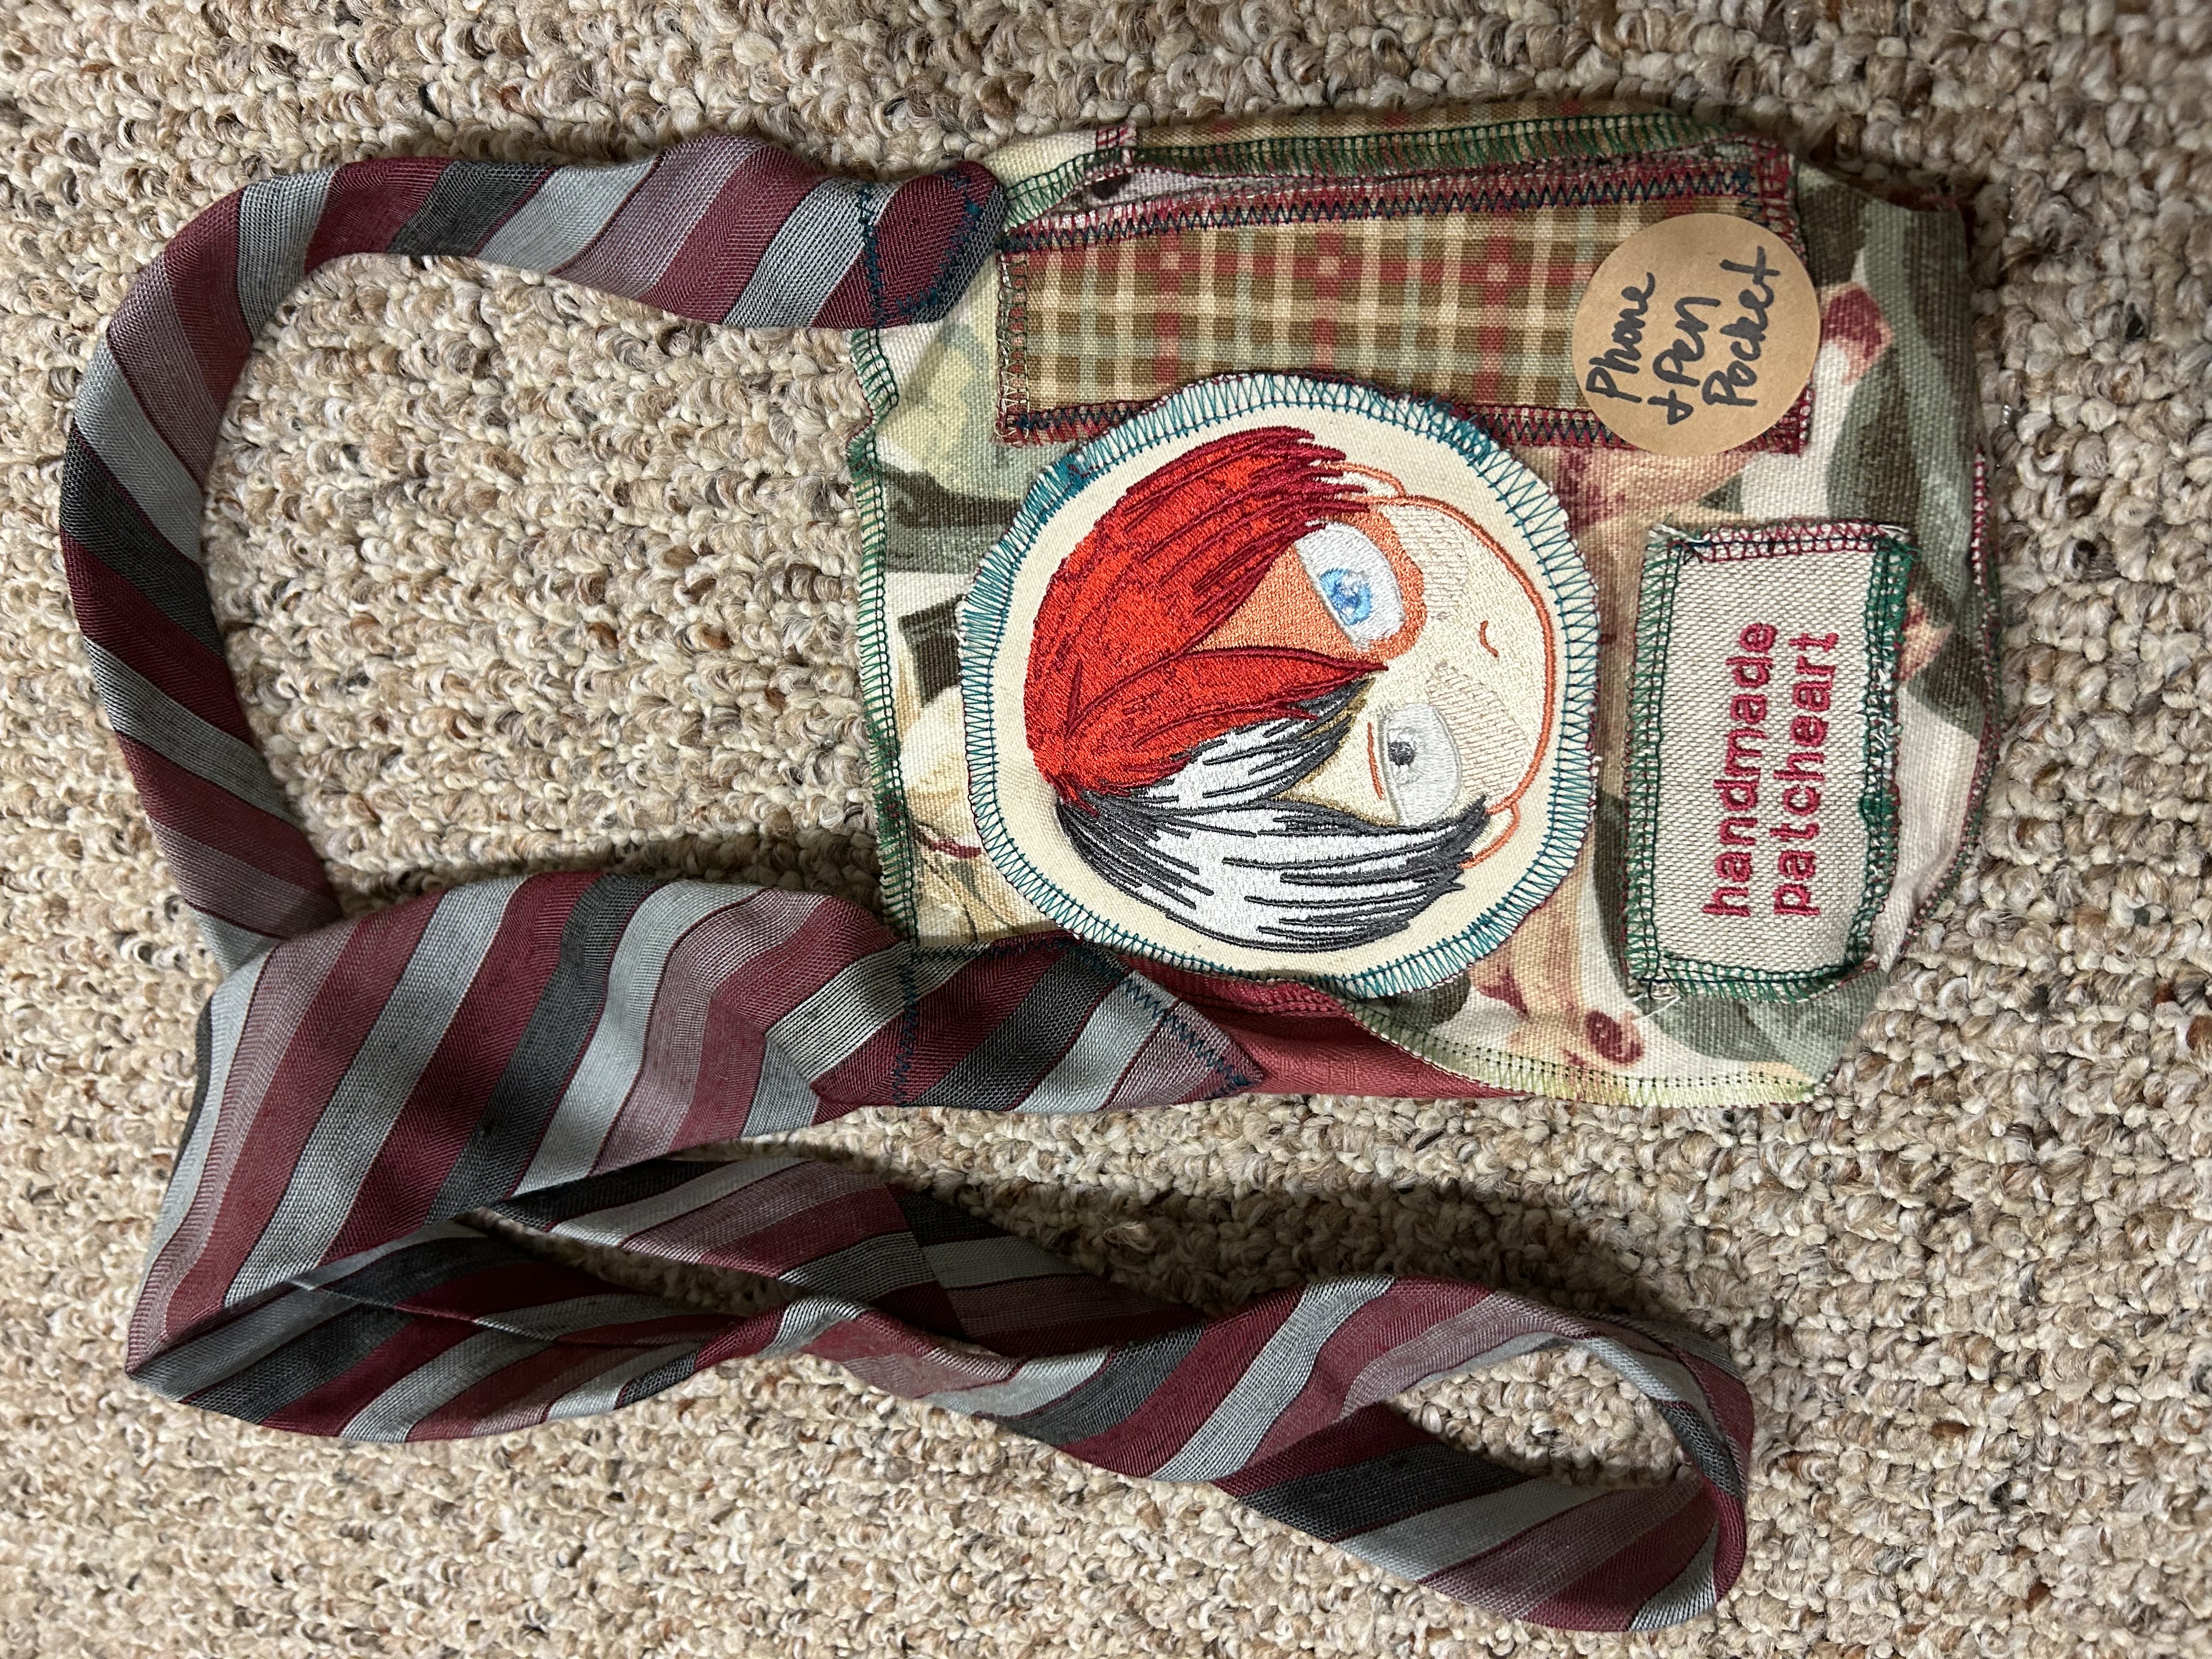 Upcycled Journal Bag Tie Handle by ShedrawsISew on DeviantArt